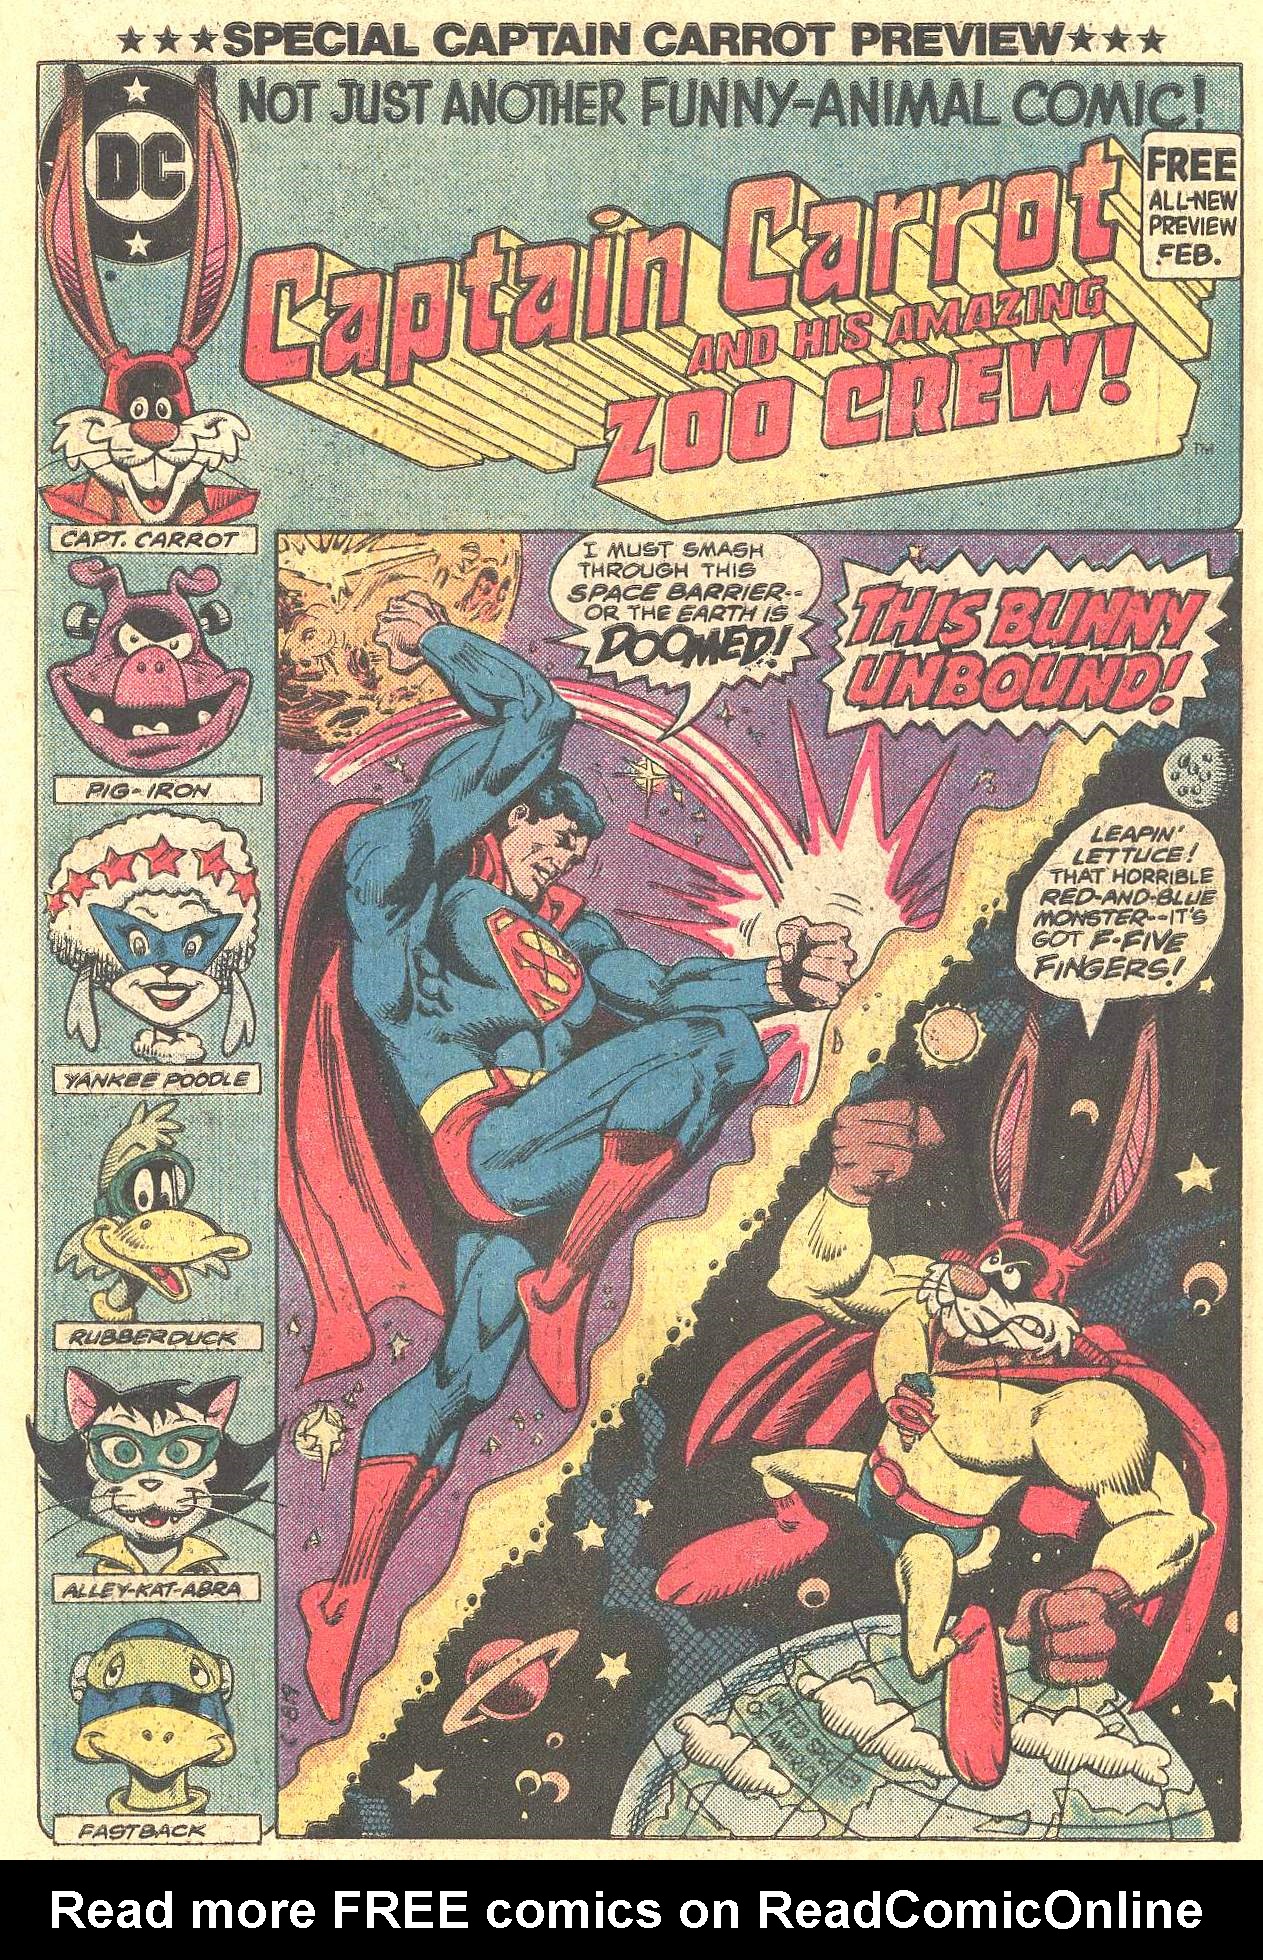 Read online Captain Carrot and His Amazing Zoo Crew! comic -  Issue #0 - 1